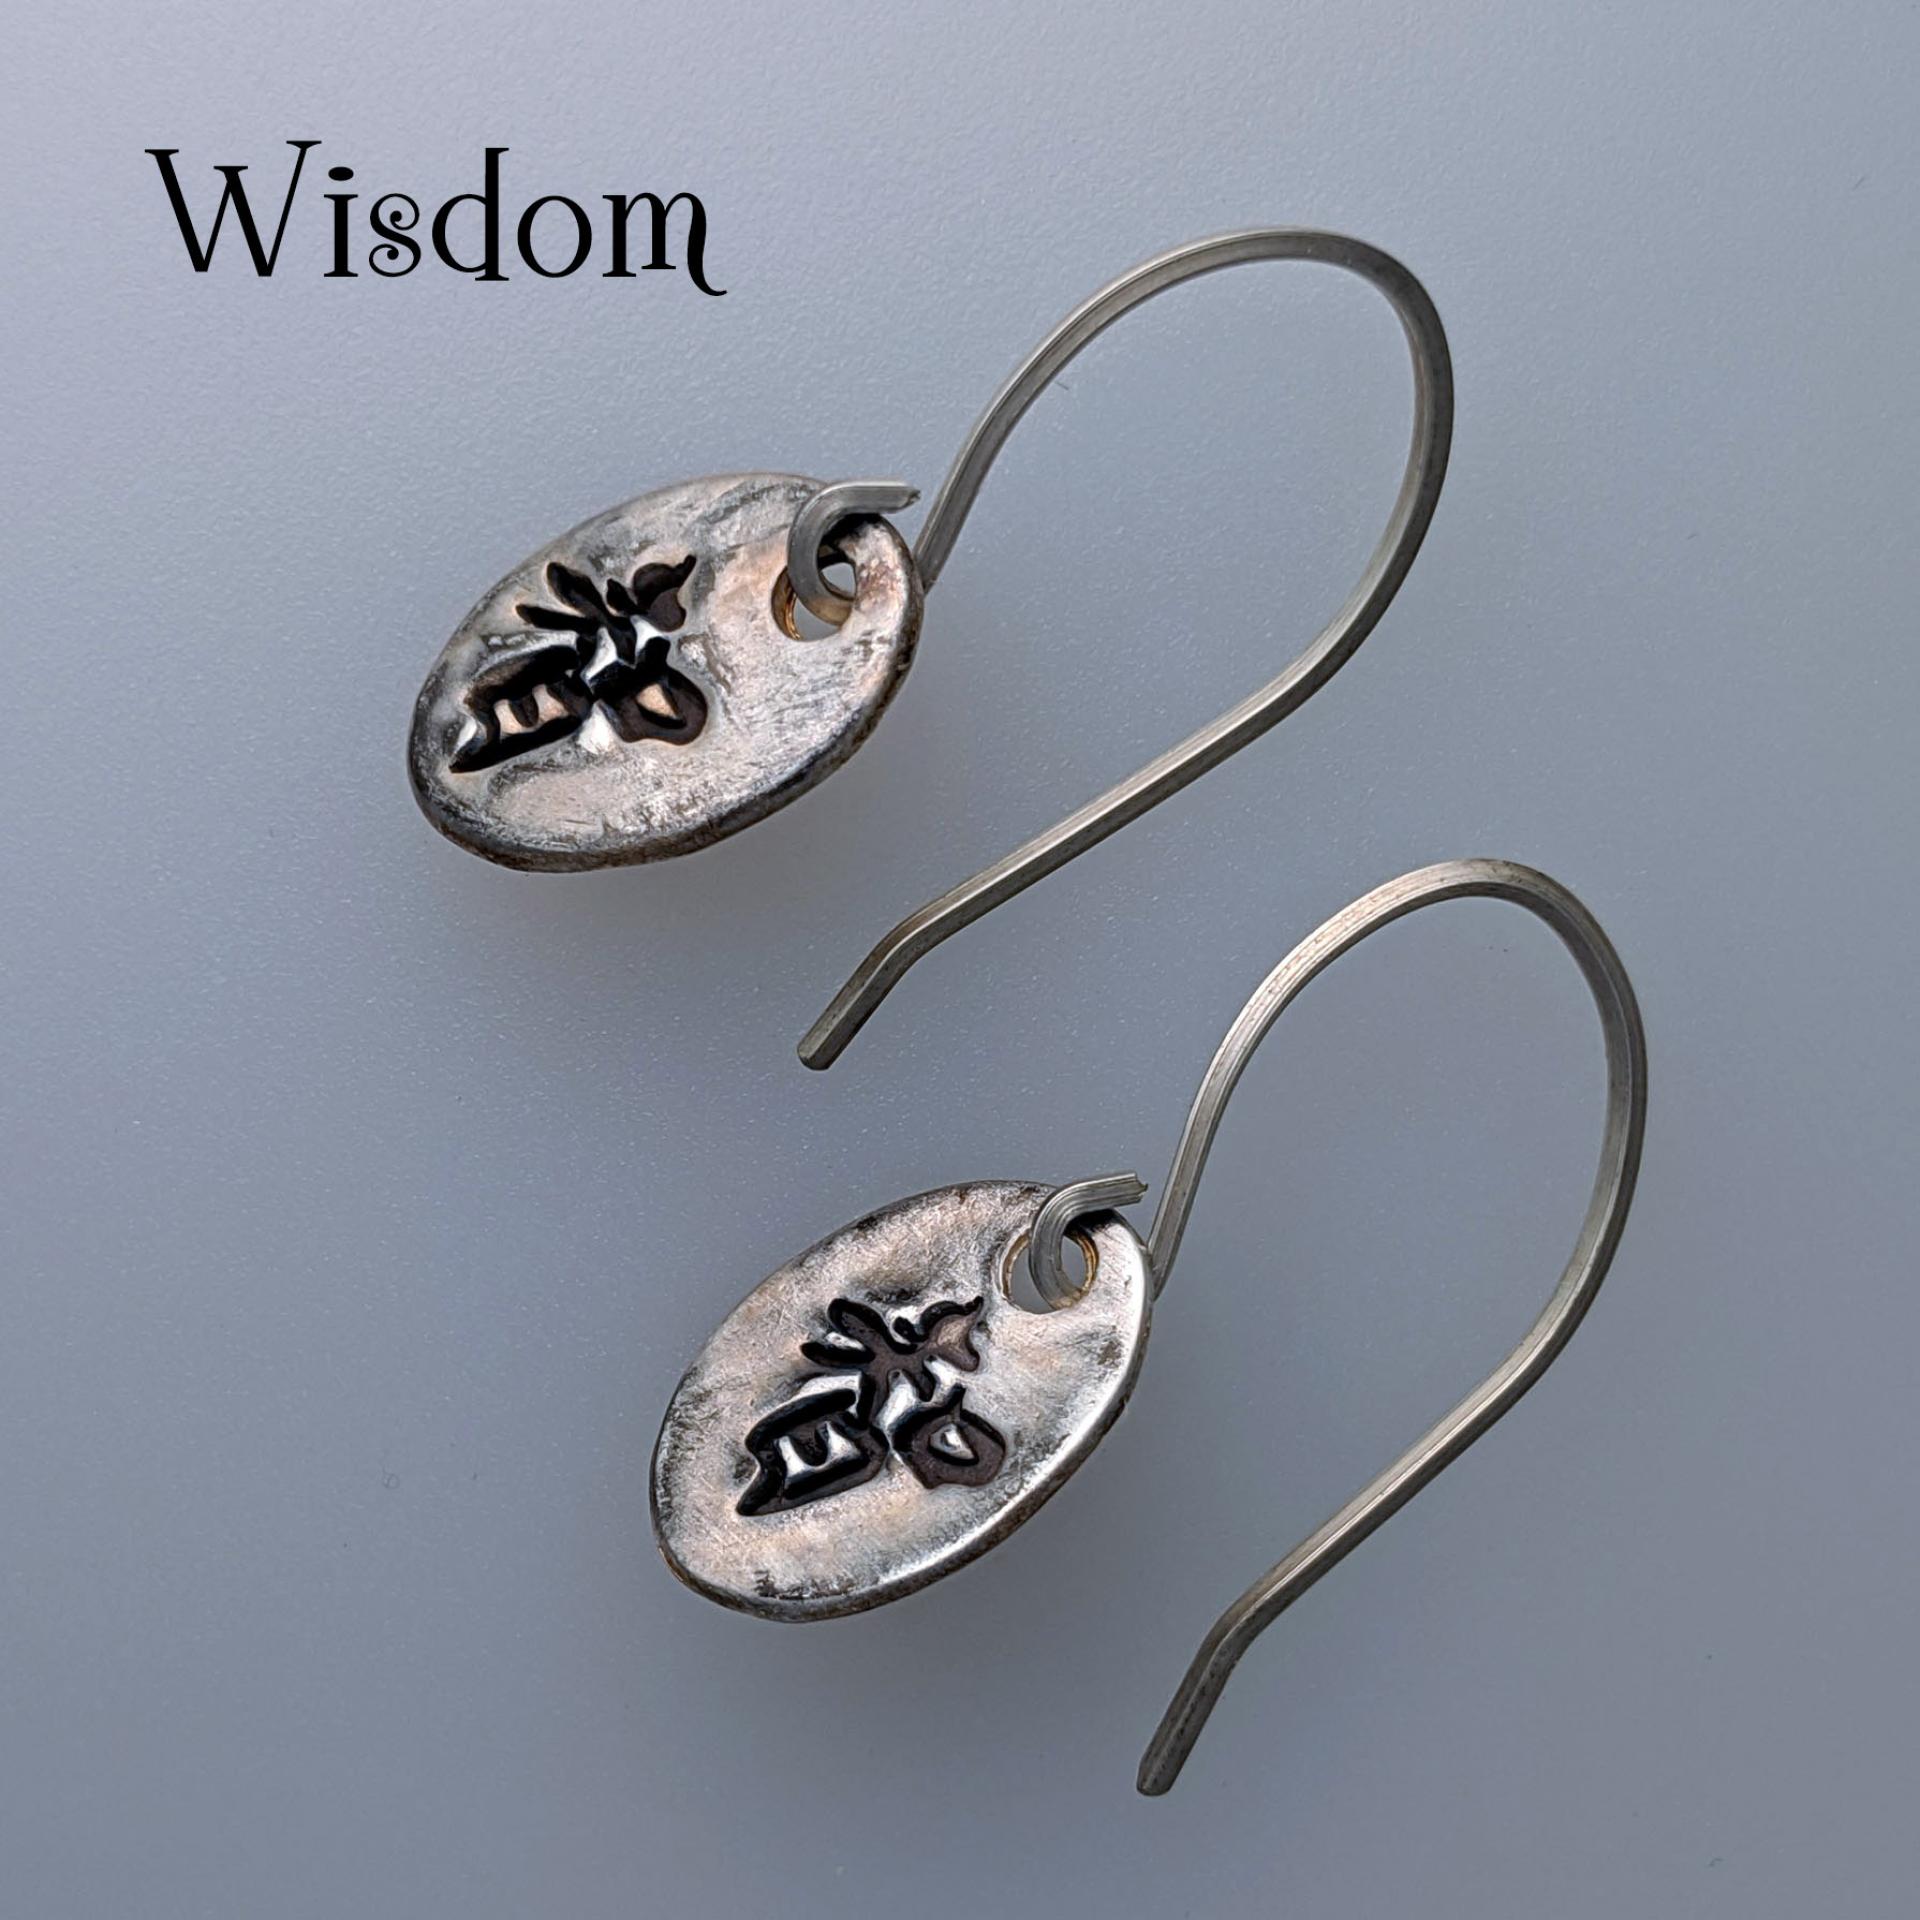 Chinese Character Earrings, Sterling Silver, Artisan Ear Wires